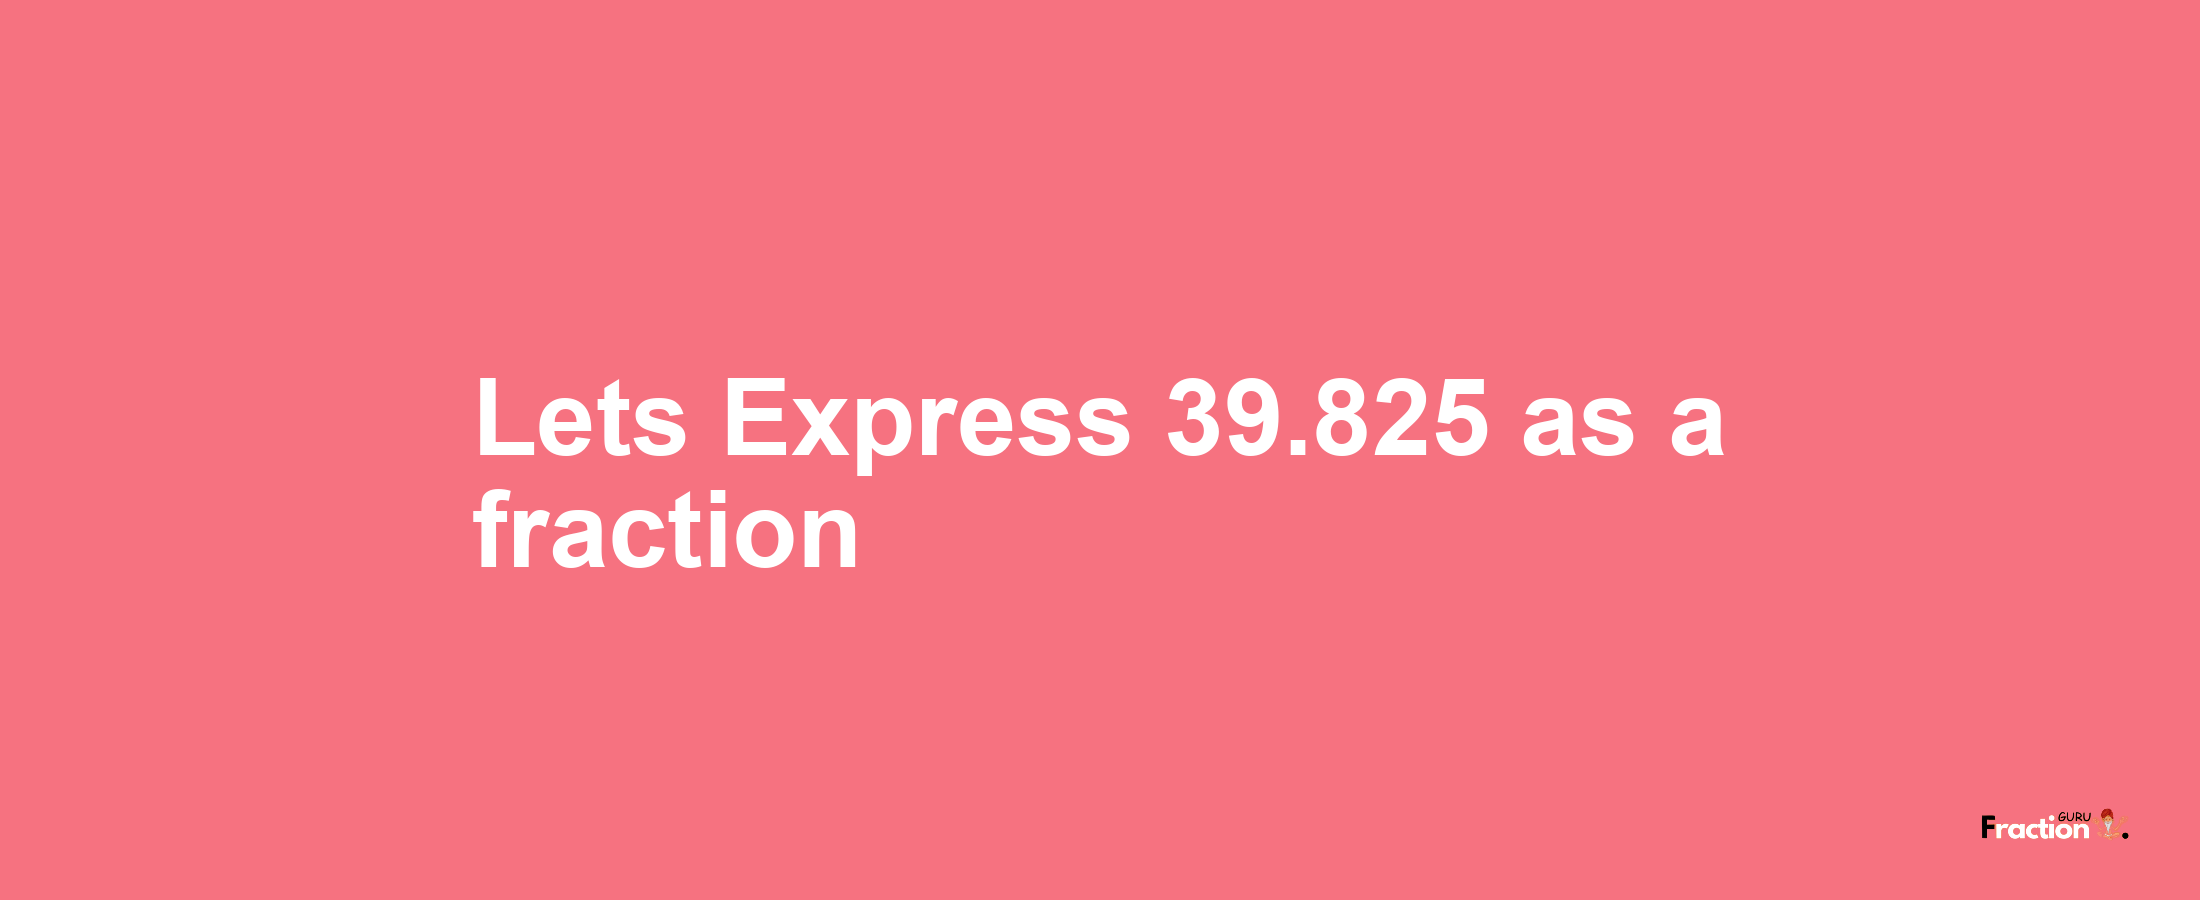 Lets Express 39.825 as afraction